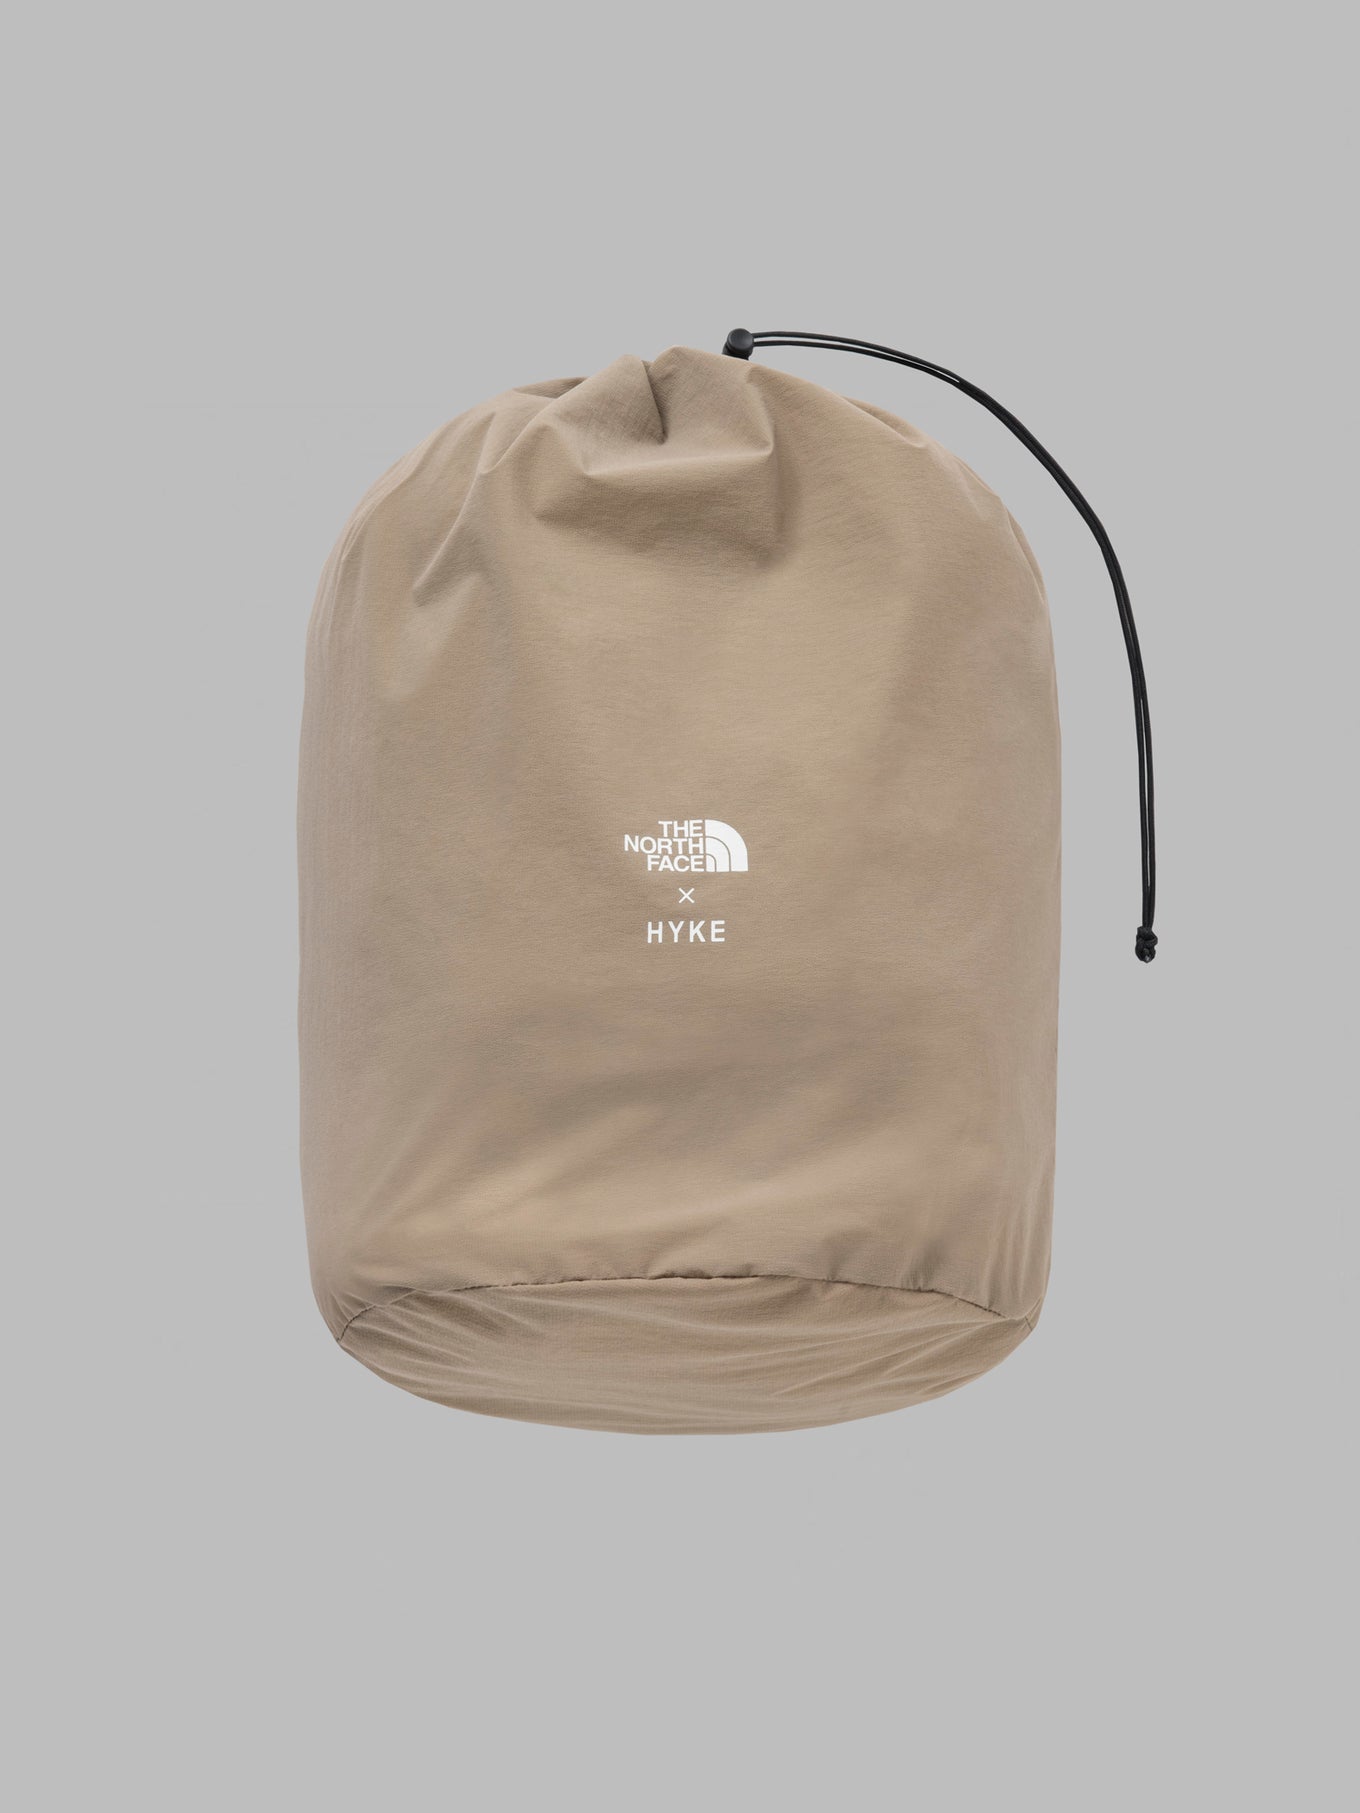 Vectiv Enduris Ⅲ HYKE Special Edition (Unisex)TNFH THE NORTH FACE